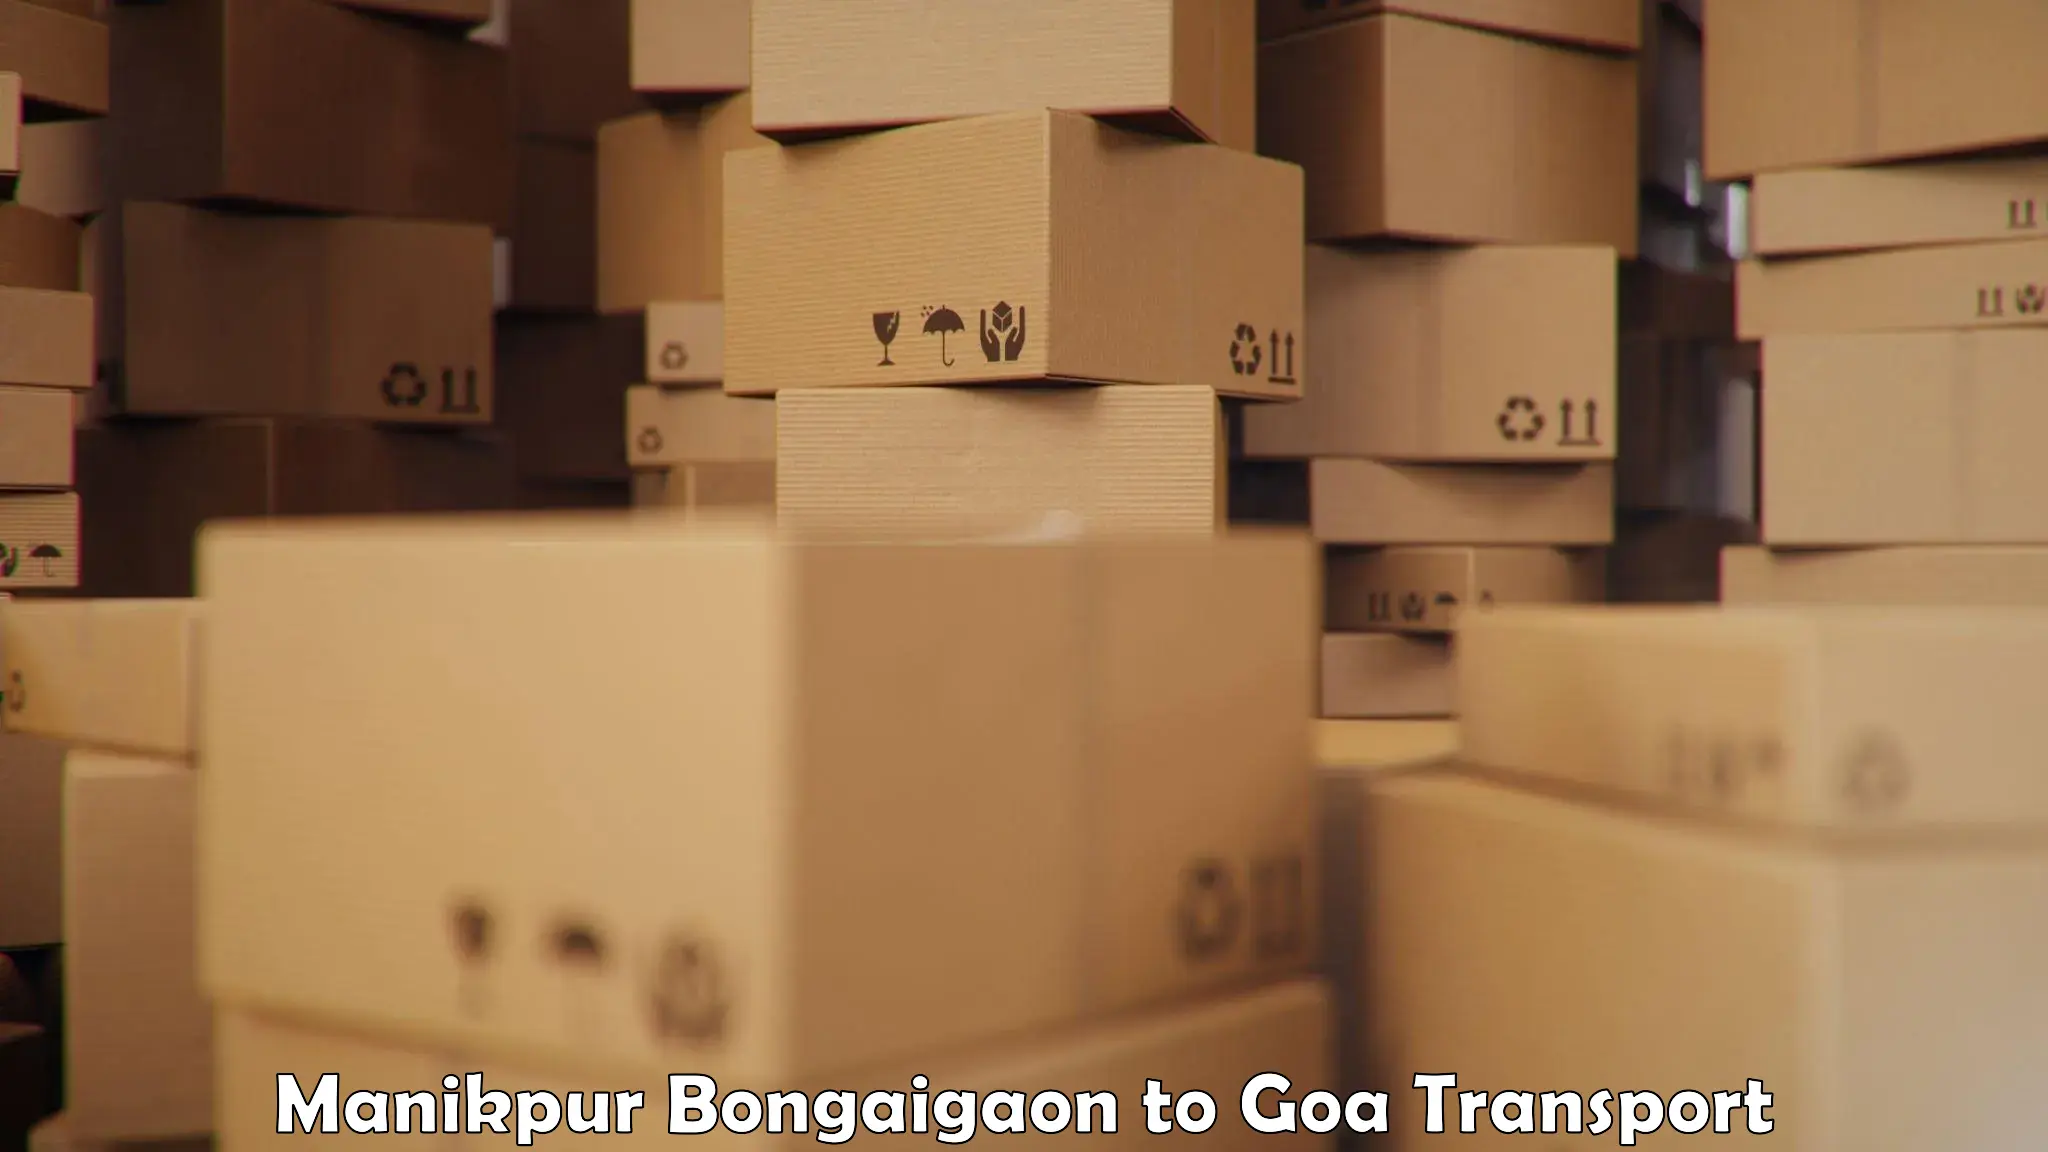 Container transport service Manikpur Bongaigaon to South Goa